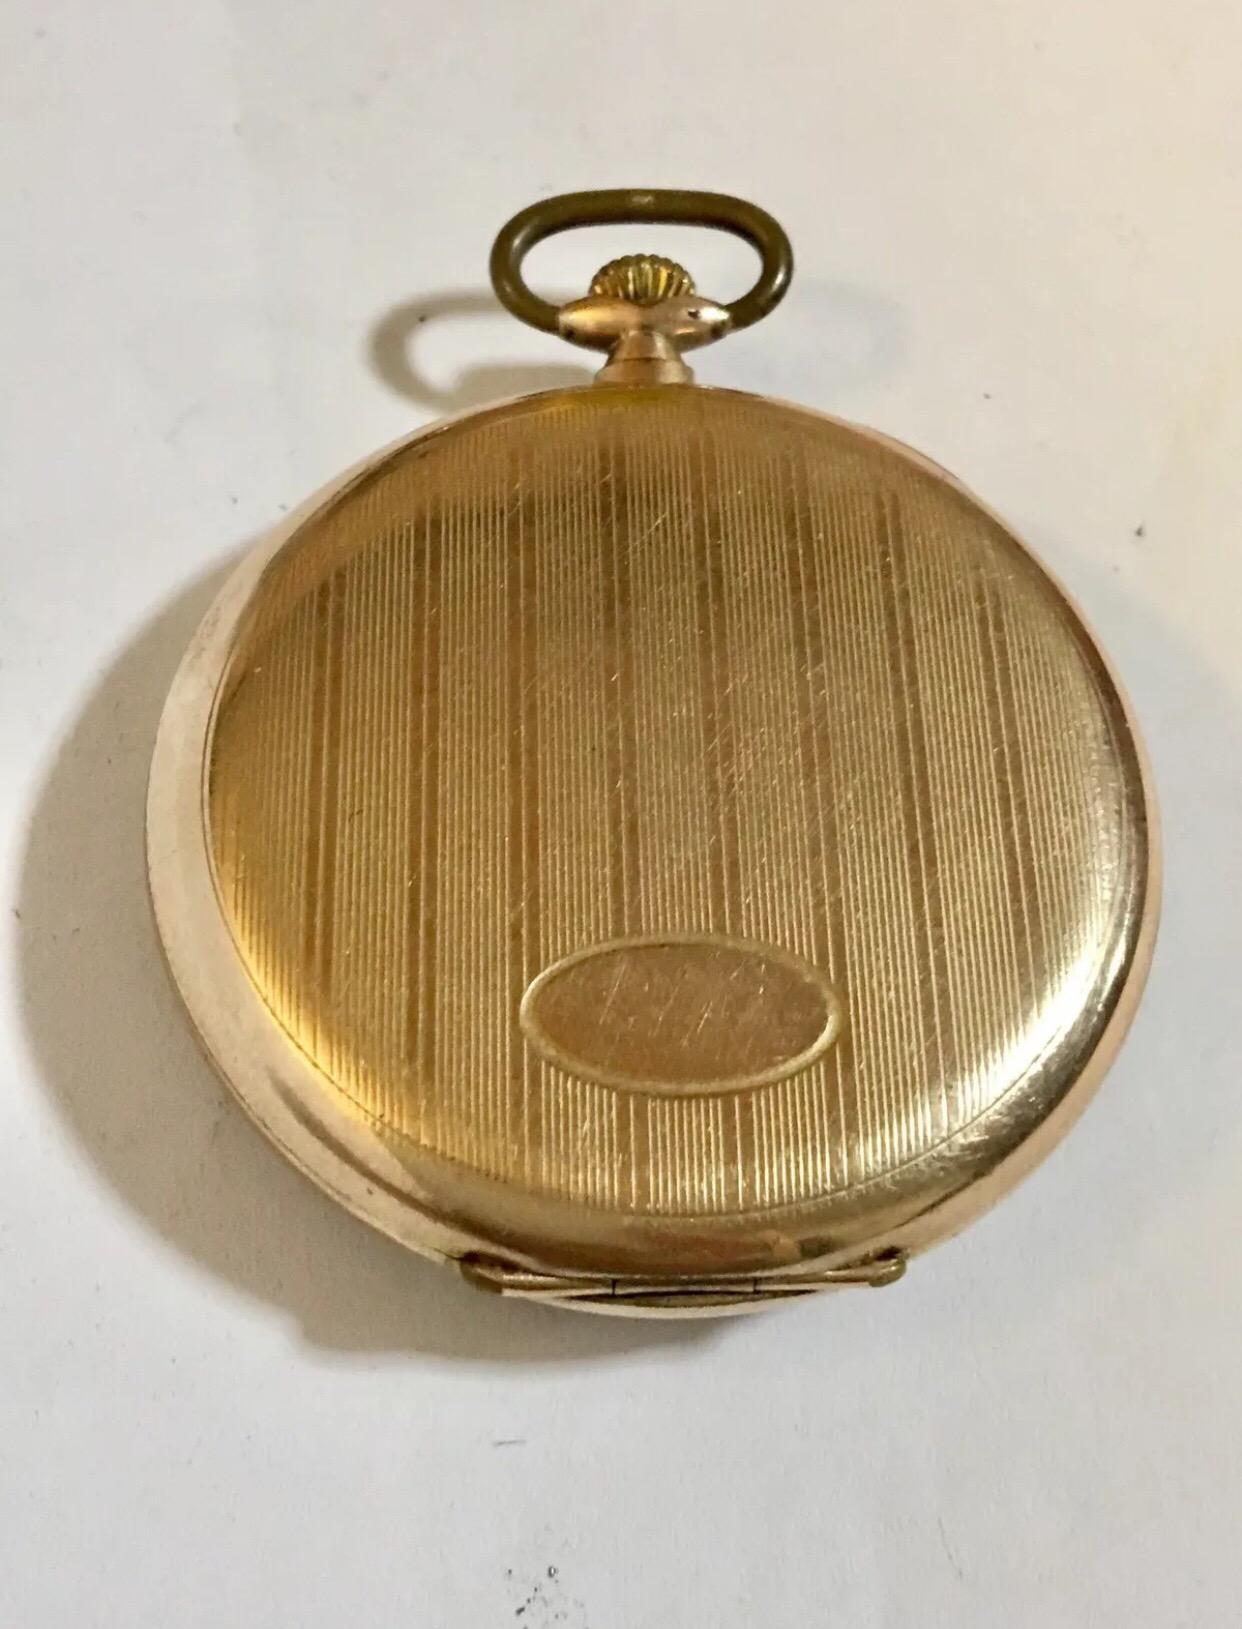 This beautiful slim 48mm diameter keyless hand winding mechanical dress watch in good working condition and it is running well. Beautiful gold plated case. Visible signs of ageing and wear with light surface marks on the case and on the glass as